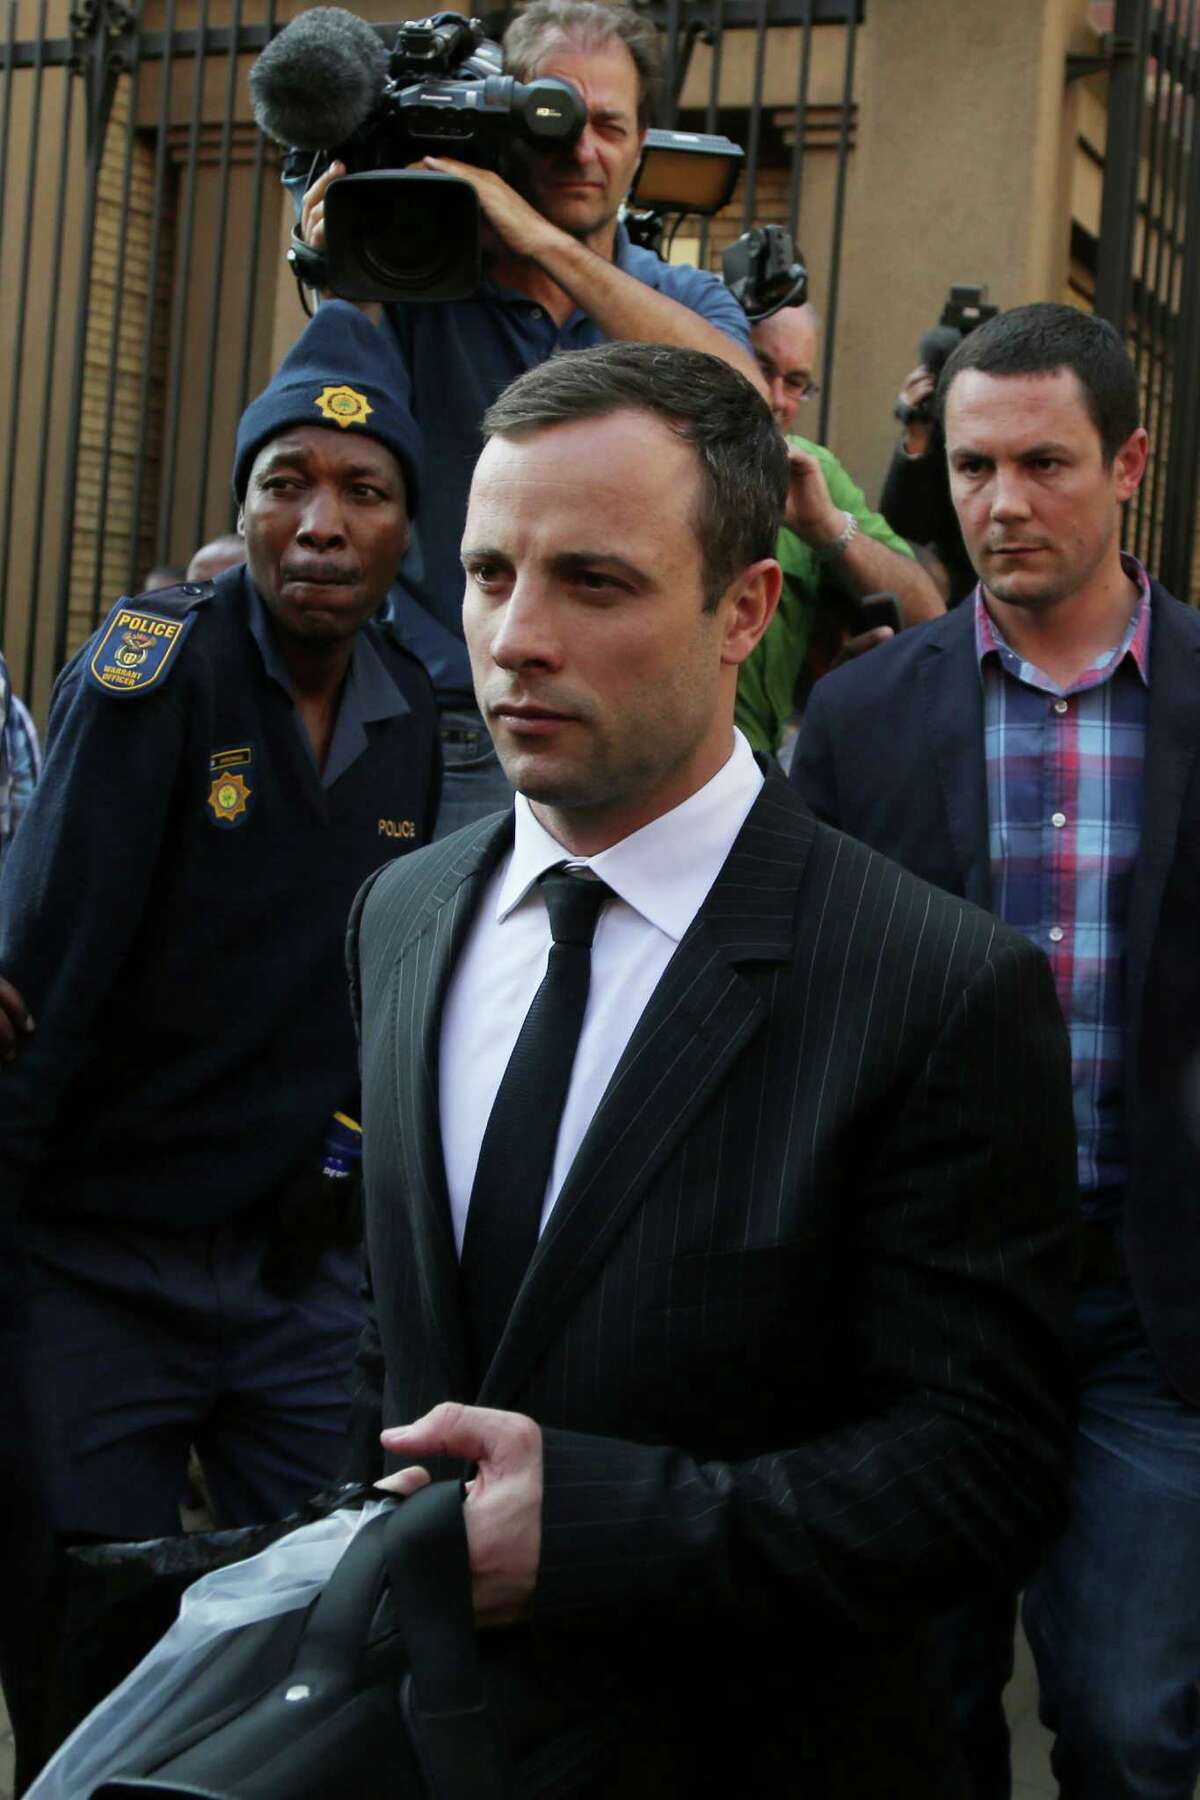 Oscar Pistorius leaves the high court in Pretoria, South Africa, Friday, Aug. 8, 2014. The judge in the murder trial of Oscar Pistorius says she will give a verdict on Sept. 11. (AP Photo/Themba Hadebe)